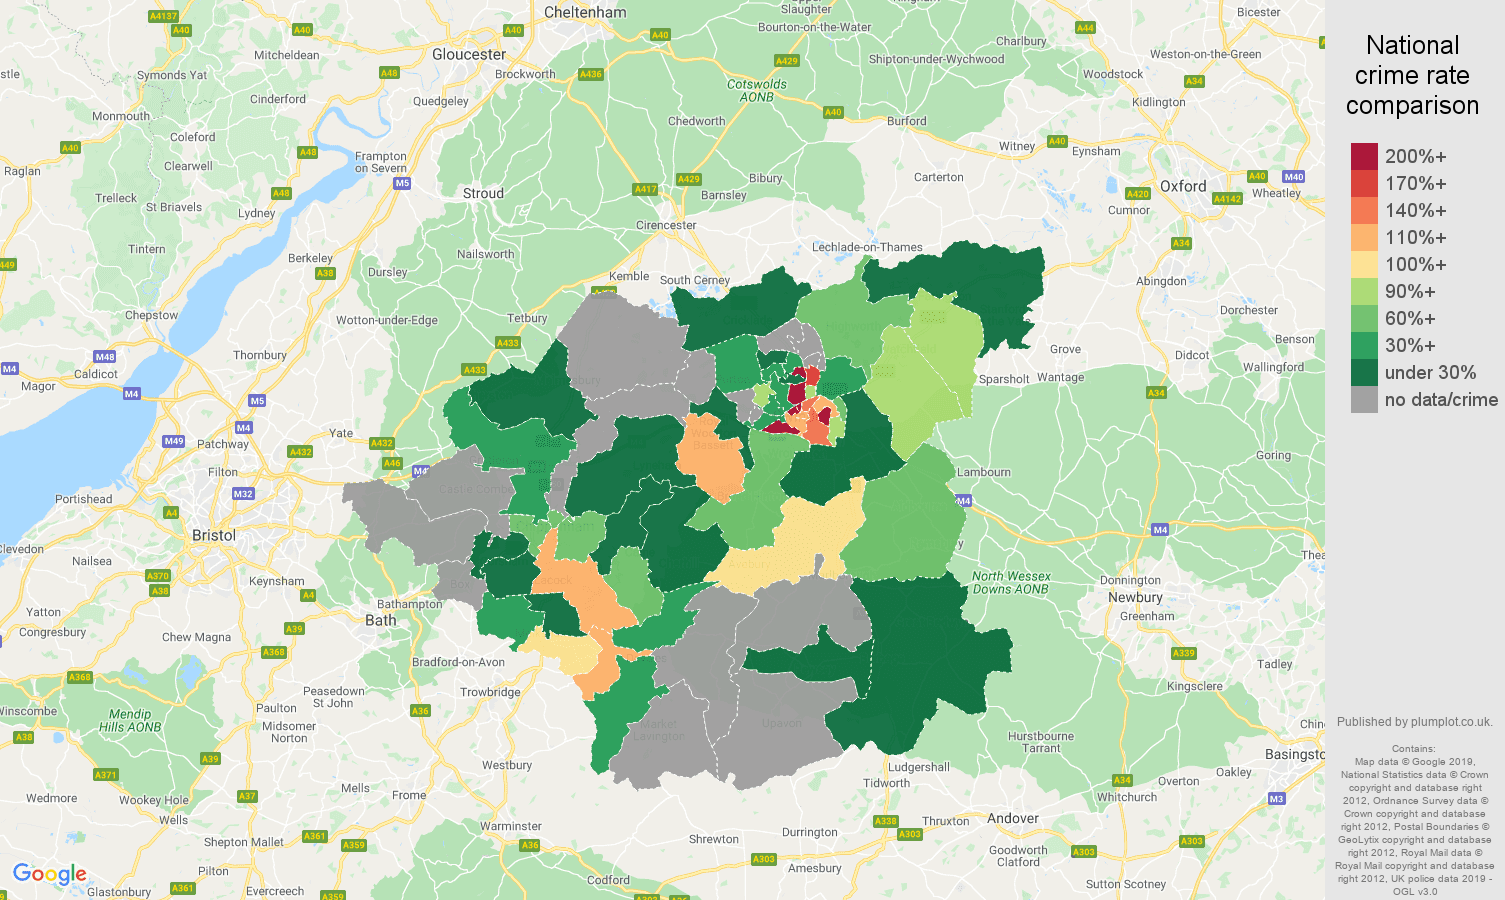 Swindon possession of weapons crime rate comparison map